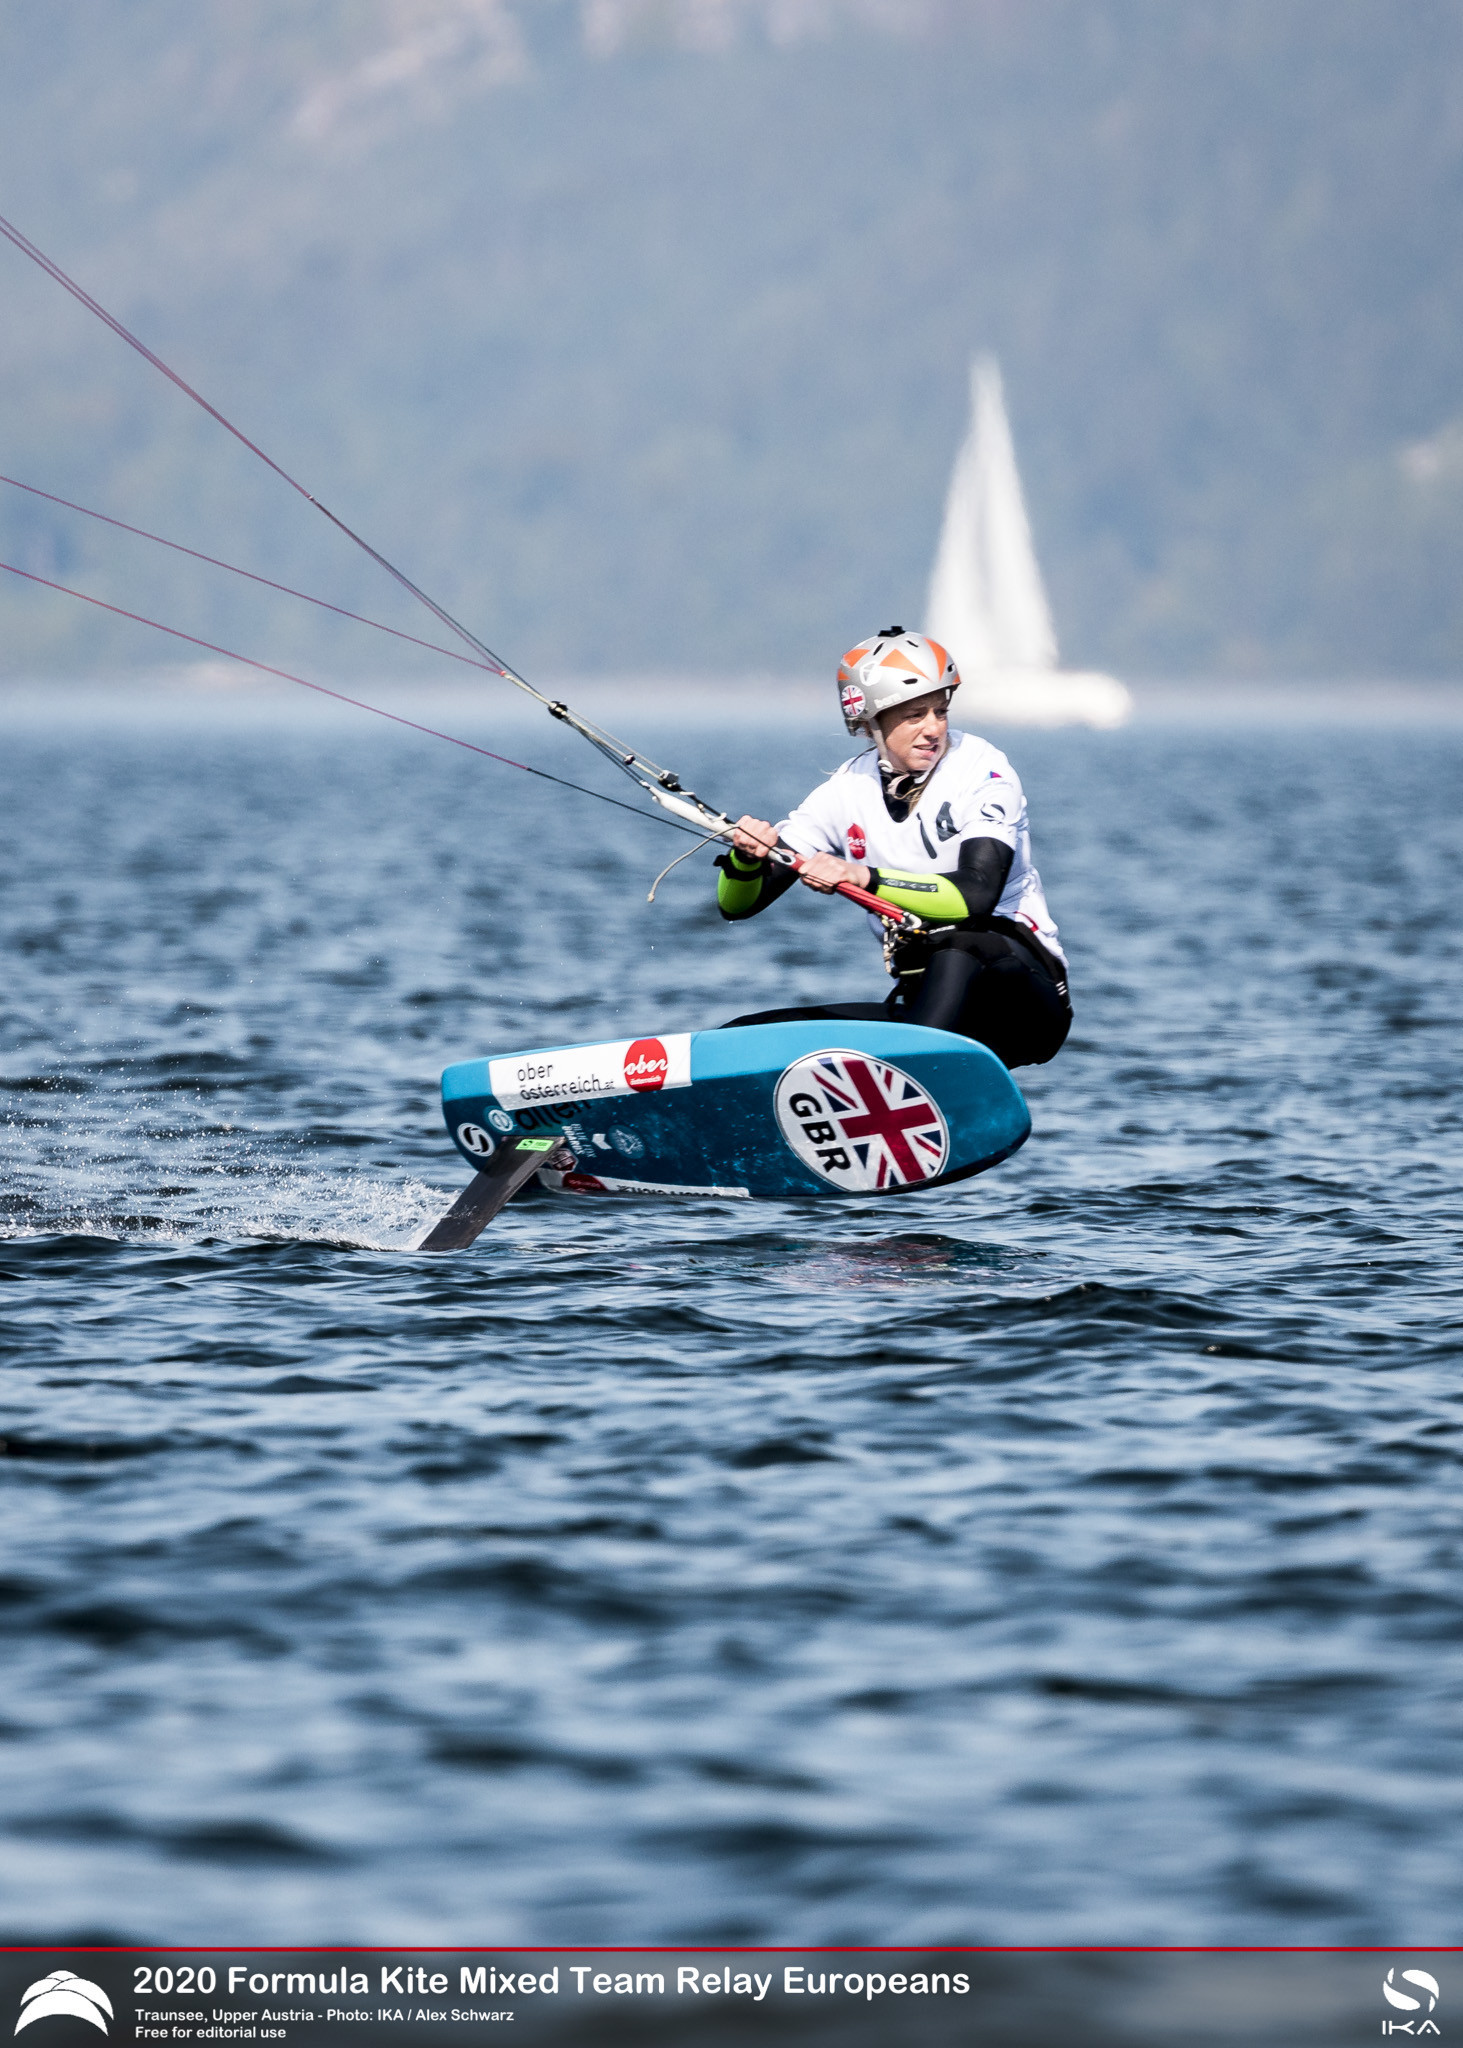 Ellie Aldridge, above, and partner Connor Bainbridge are third overall after the first day of racing ©IKA